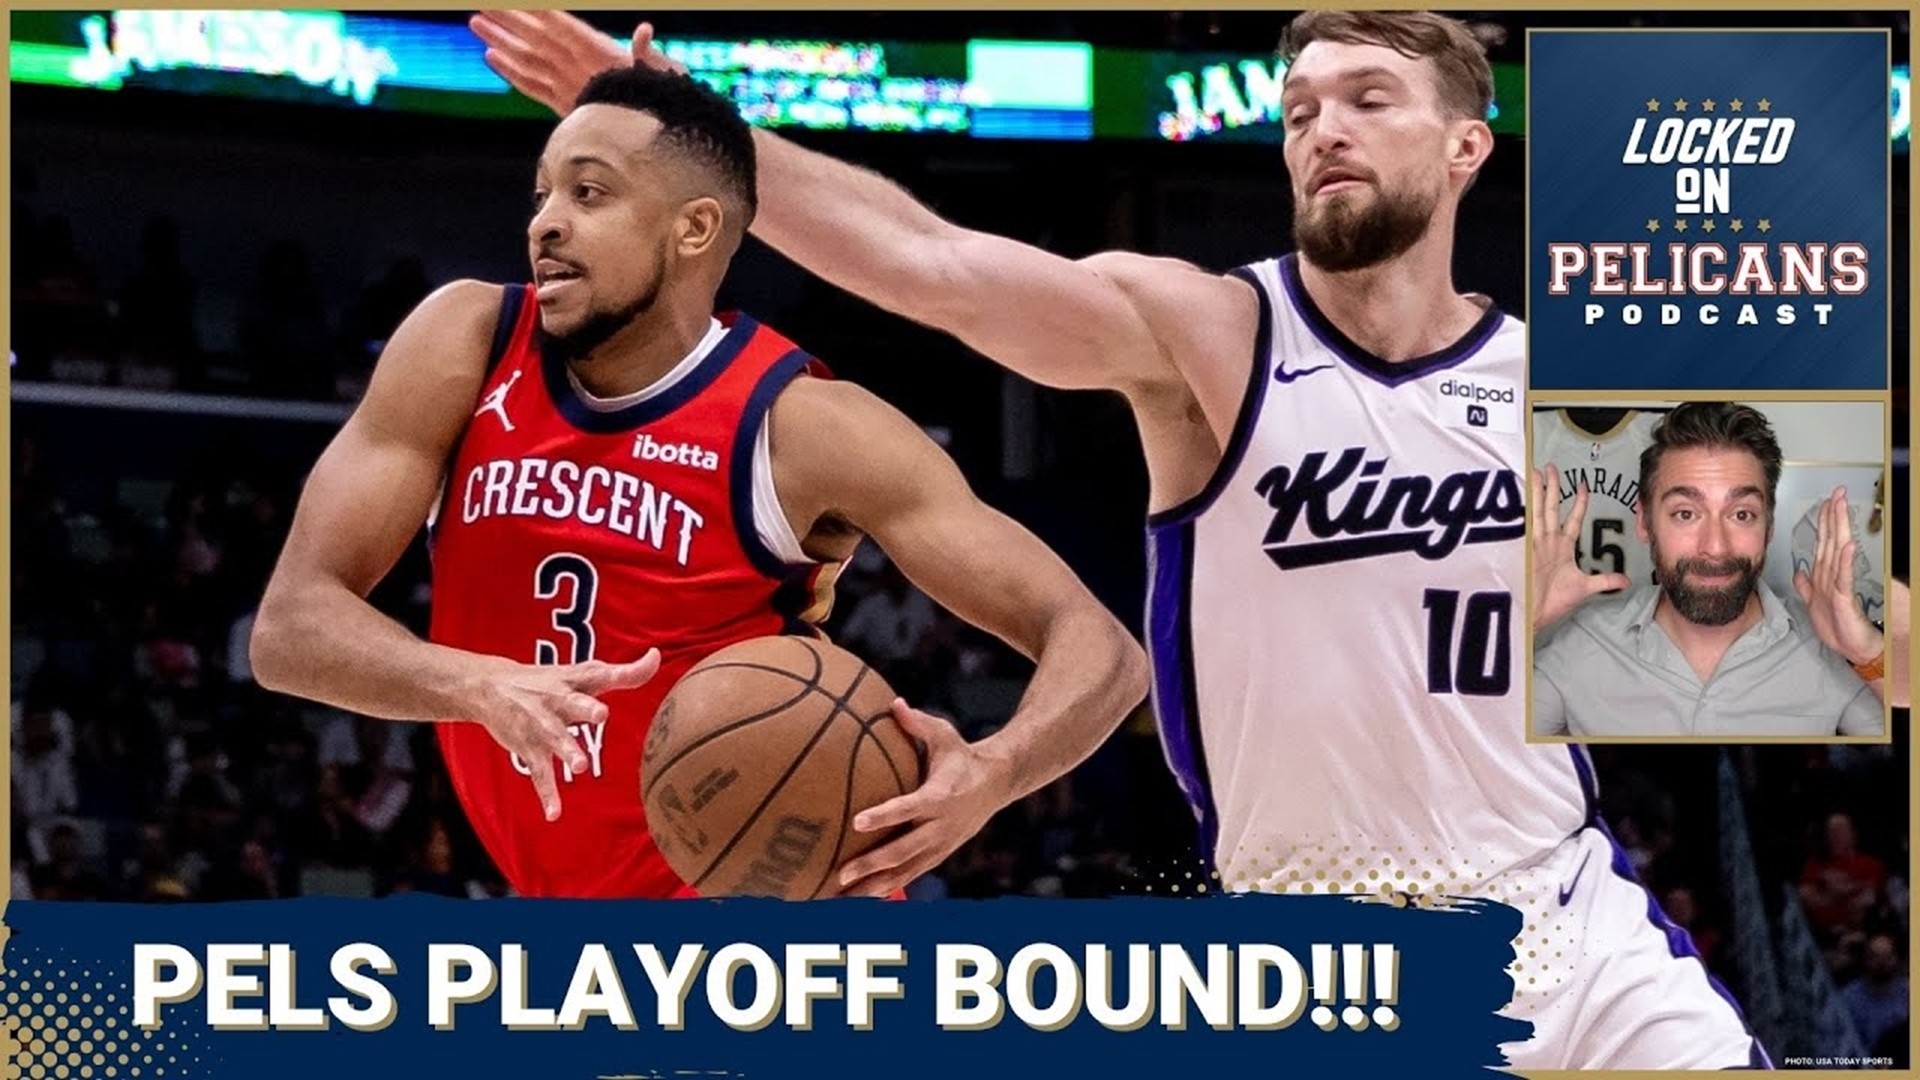 The New Orleans Pelicans are in the playoffs after two unlikely heroes led the way in the win over the Sacramento Kings.